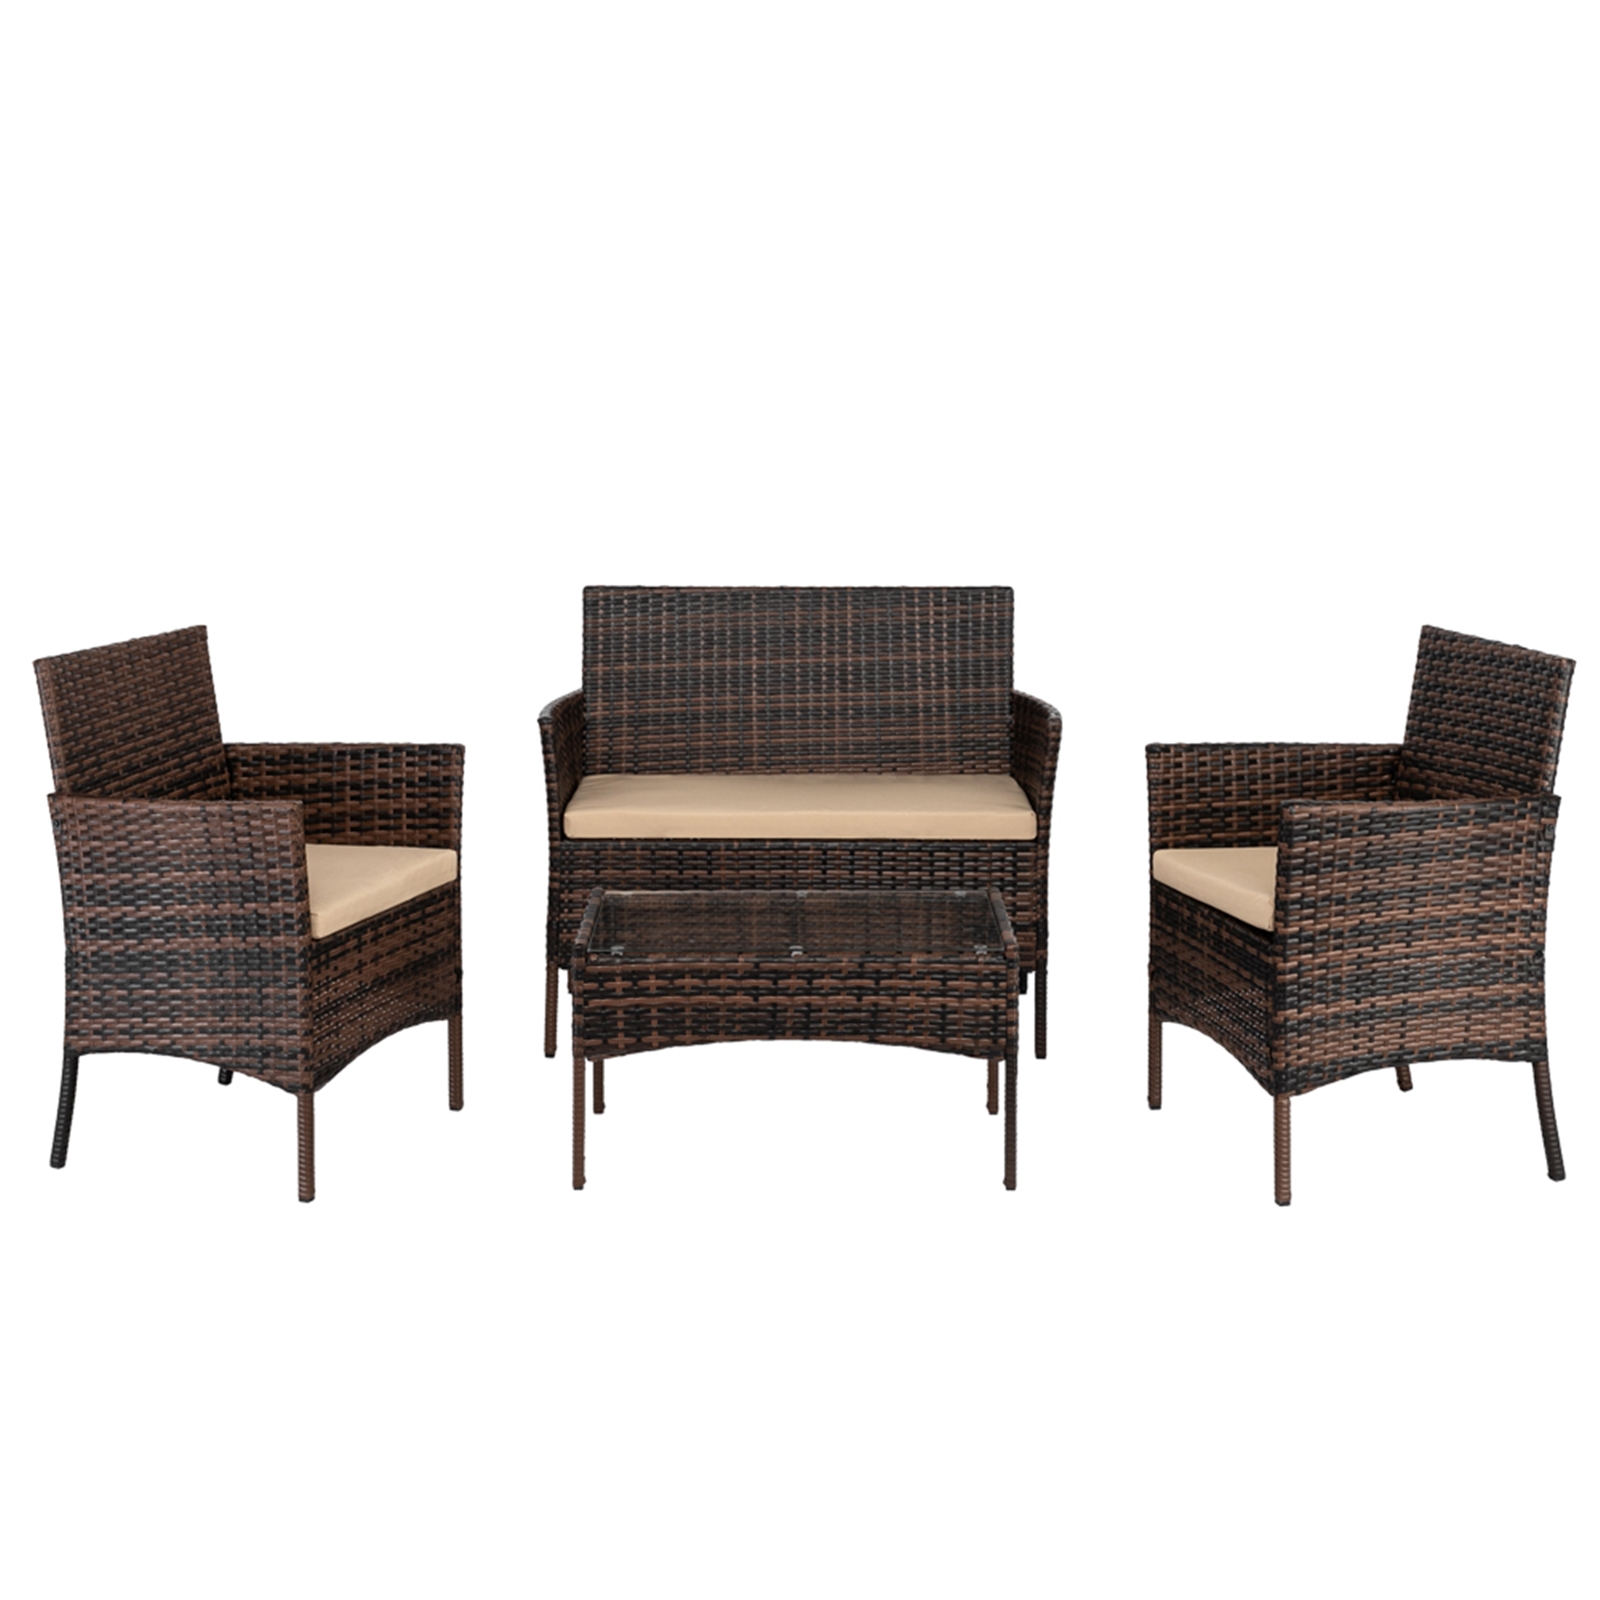 4 Piece Wicker Patio Conversation Furniture Set, Outdoor Rattan Chair and Table Set, Sectional Chair Set with Tea Table & Cushions, Bistro Set for Patio Backyard Porch Garden Poolside Balcony, B4512 - image 4 of 9